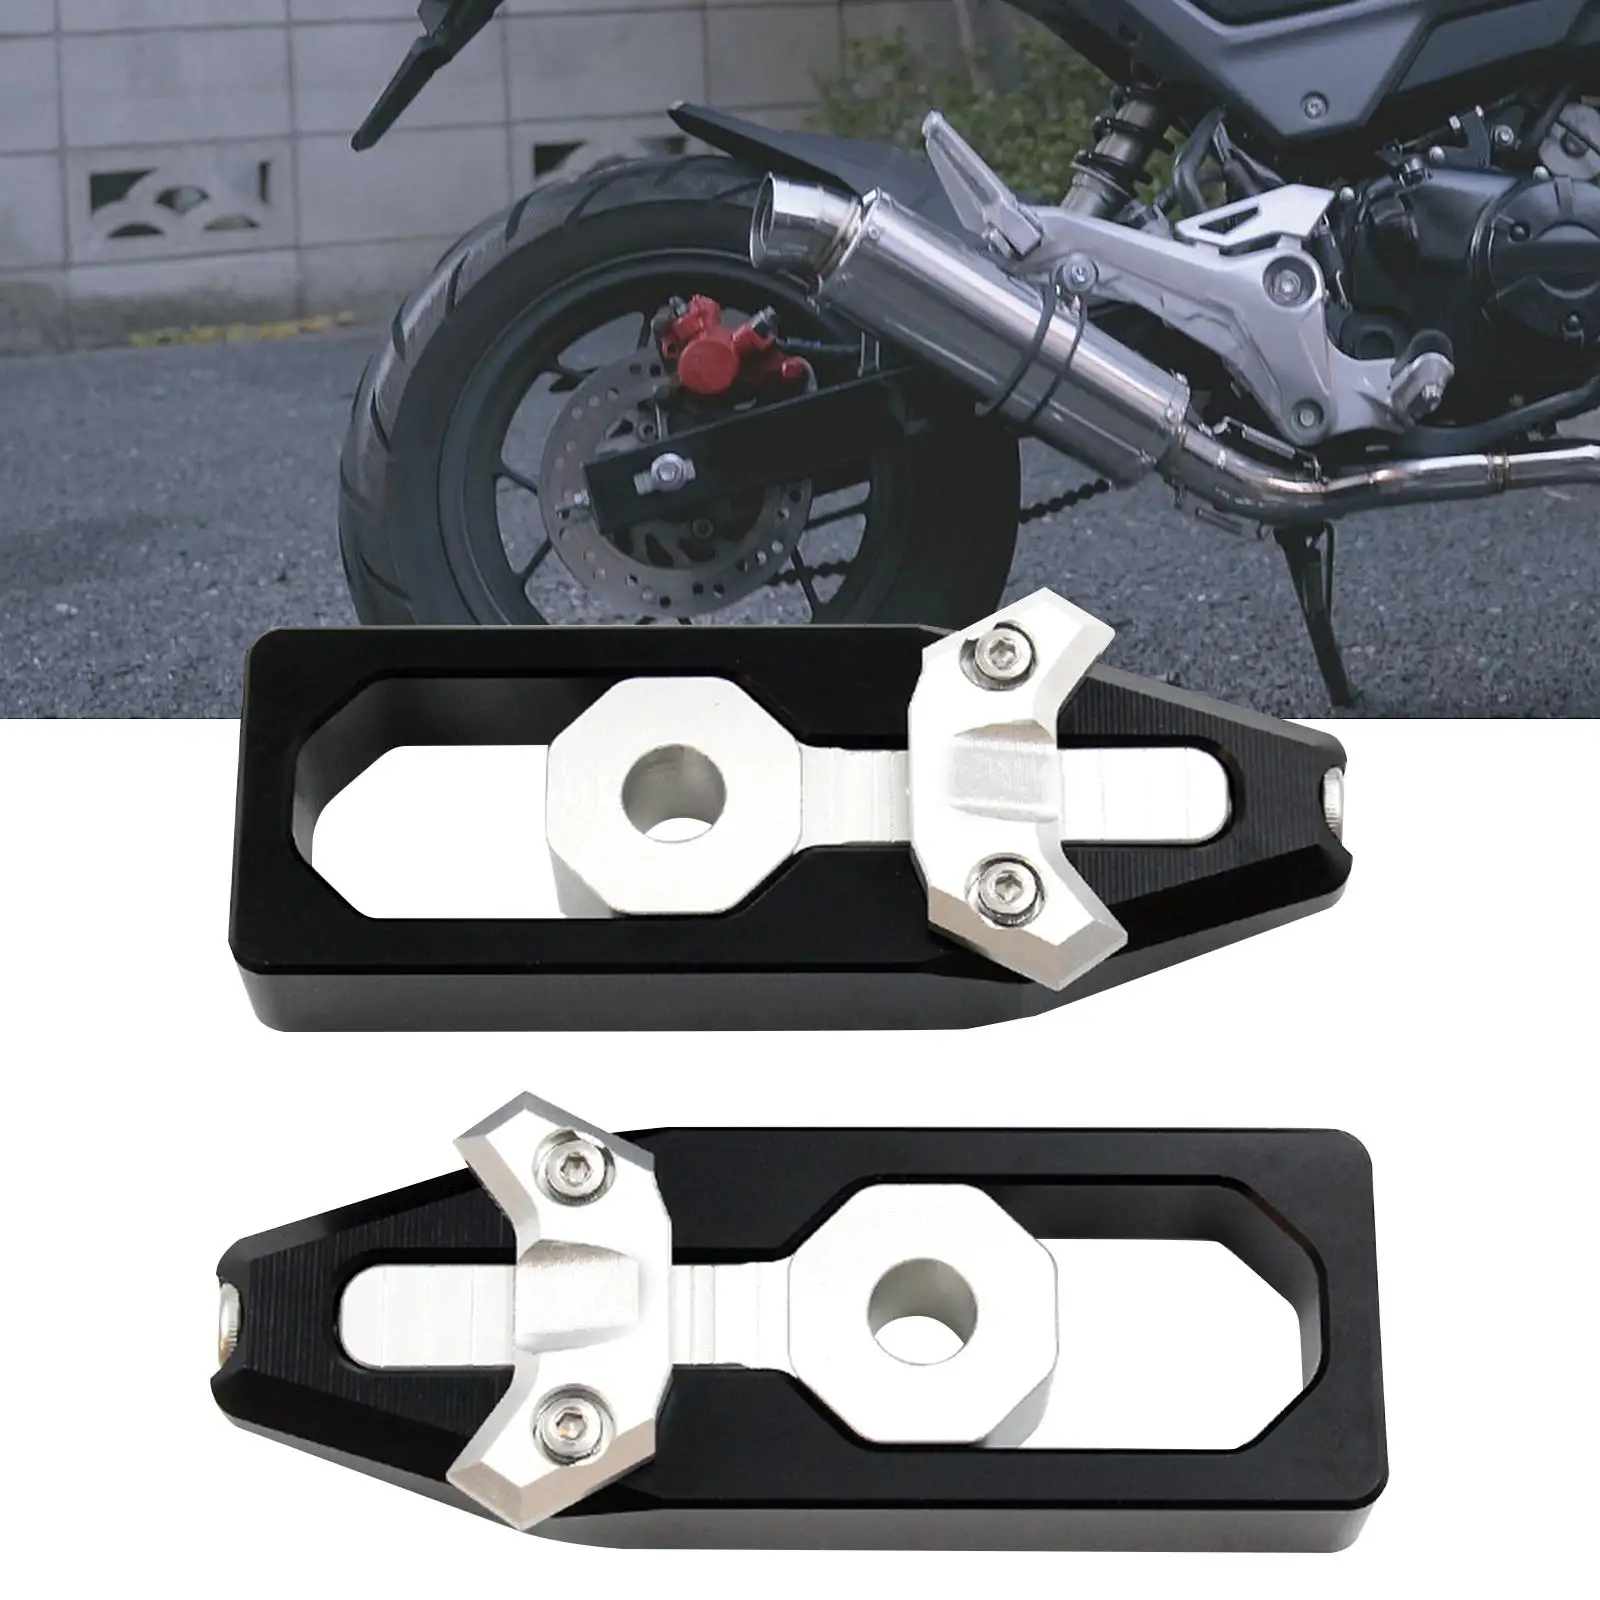 2x Chain Tensioner Motorcycle Chain Adjusting Tool Practical Simple Installation